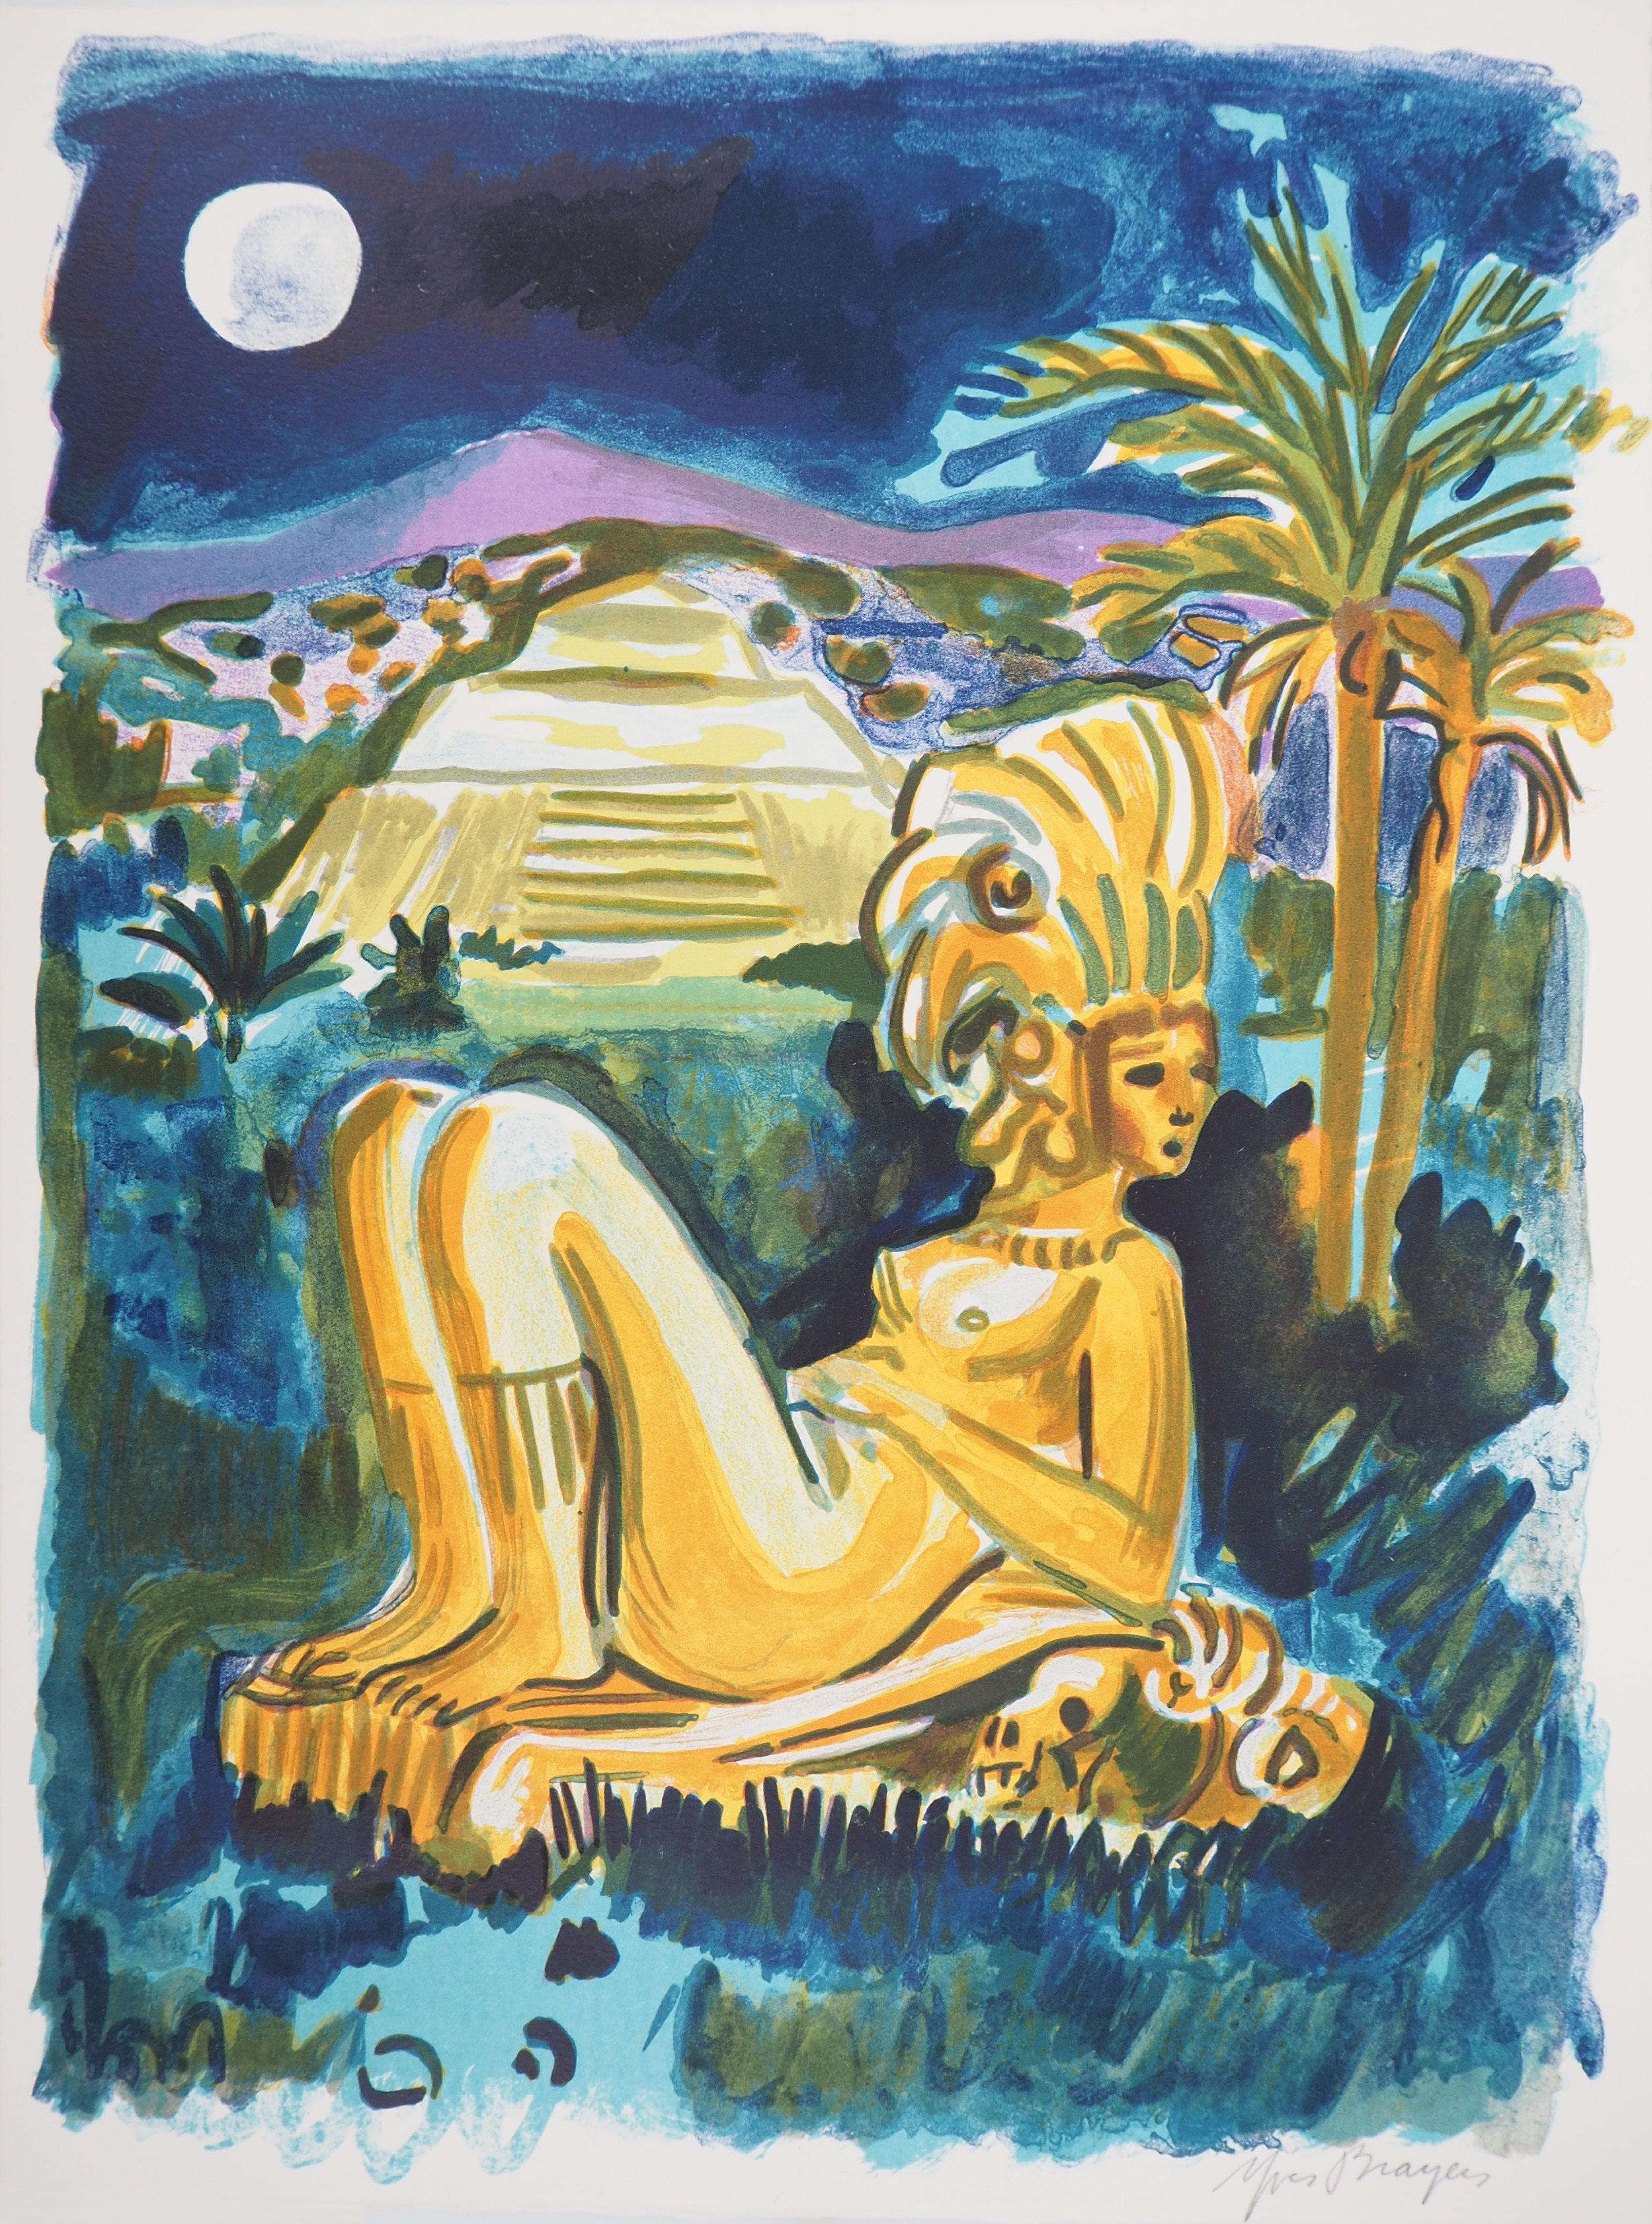 Yves Brayer Figurative Print - Mexico Mysteries (Pyramid) - Original handsigned lithograph